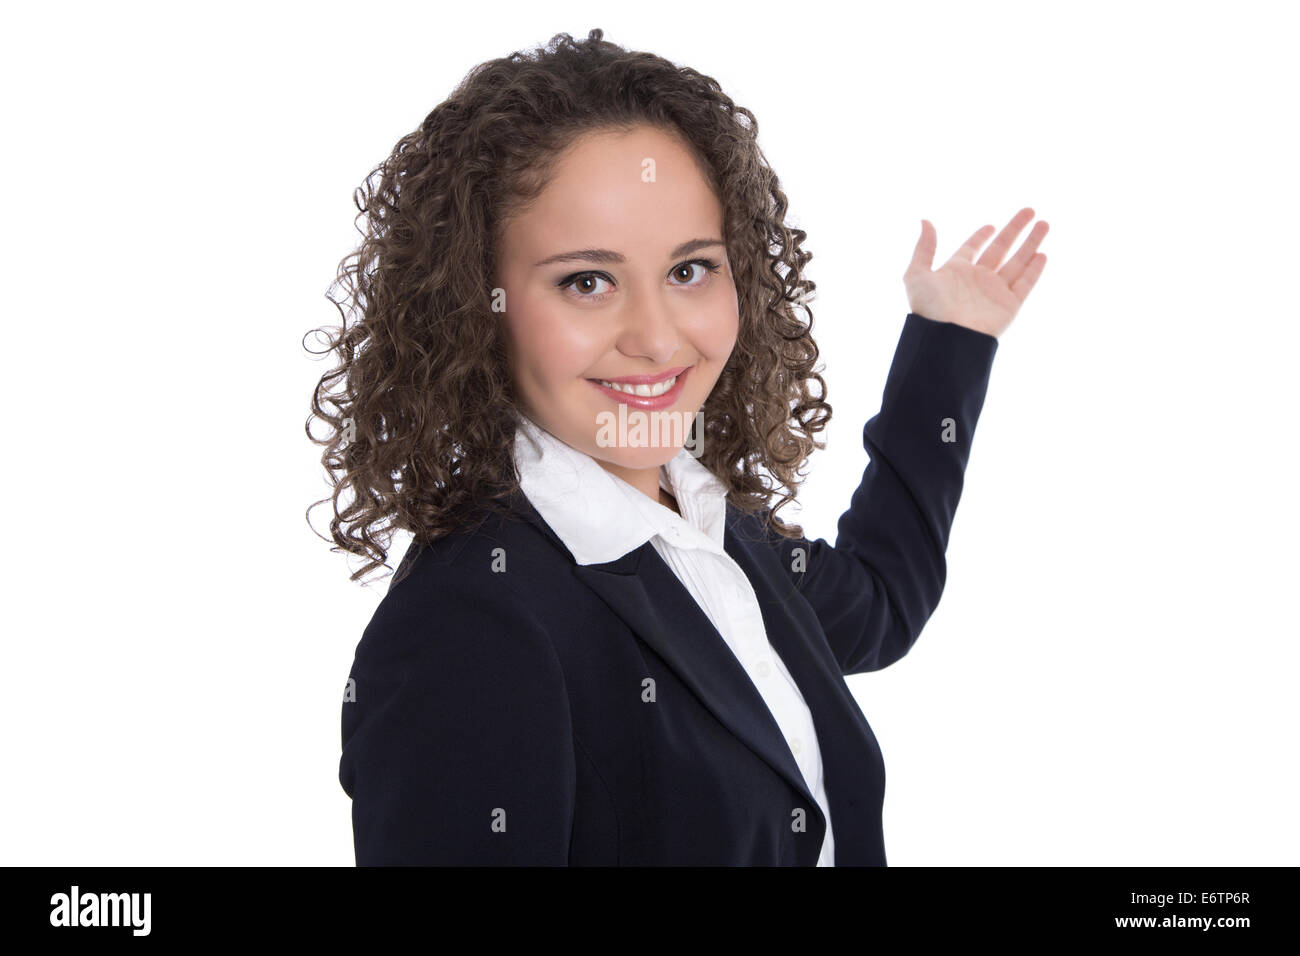 Professional isolated young businesswoman with brunette curly hair presenting over white background with hand. Stock Photo